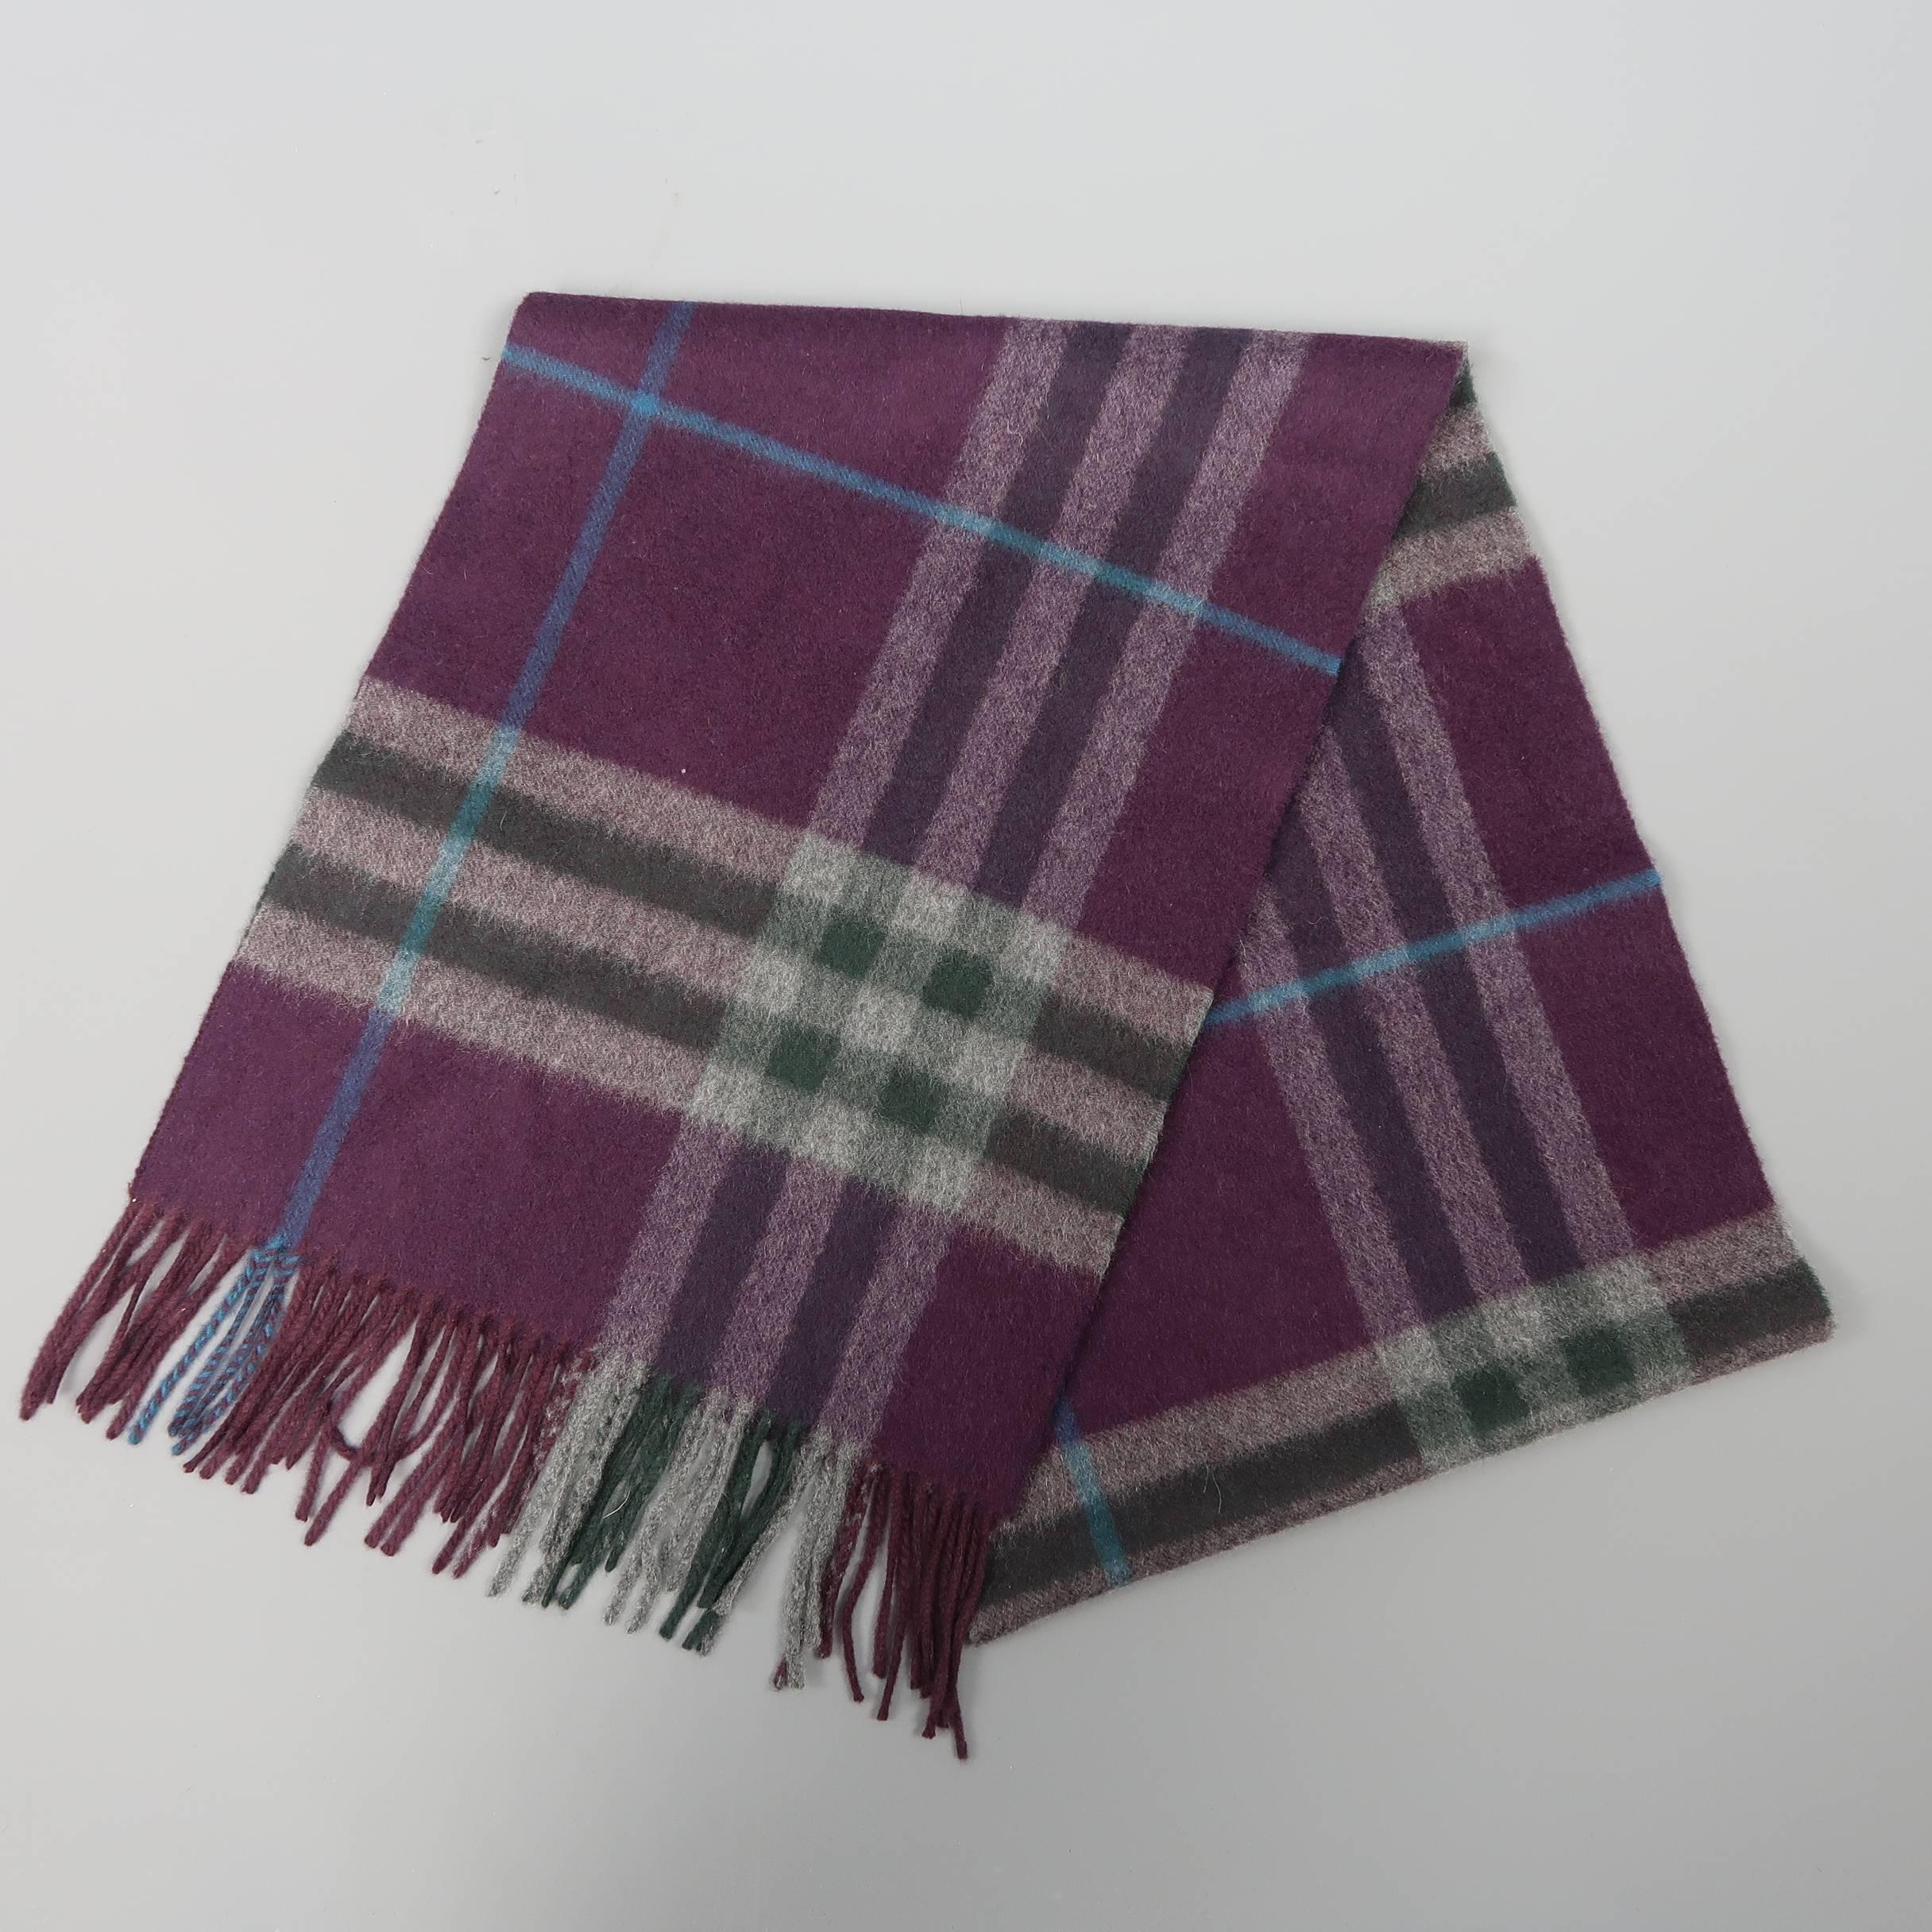 Classic BURBERRY scarf comes in eggplant purple cashmere knit with all over signature plaid print detailed with hues of gray, forest green, and aqua blue and fringe trim. Made in Scotland.
 
Excellent Pre-Owned Condition.
 
Length: 64 in.
Width: 12